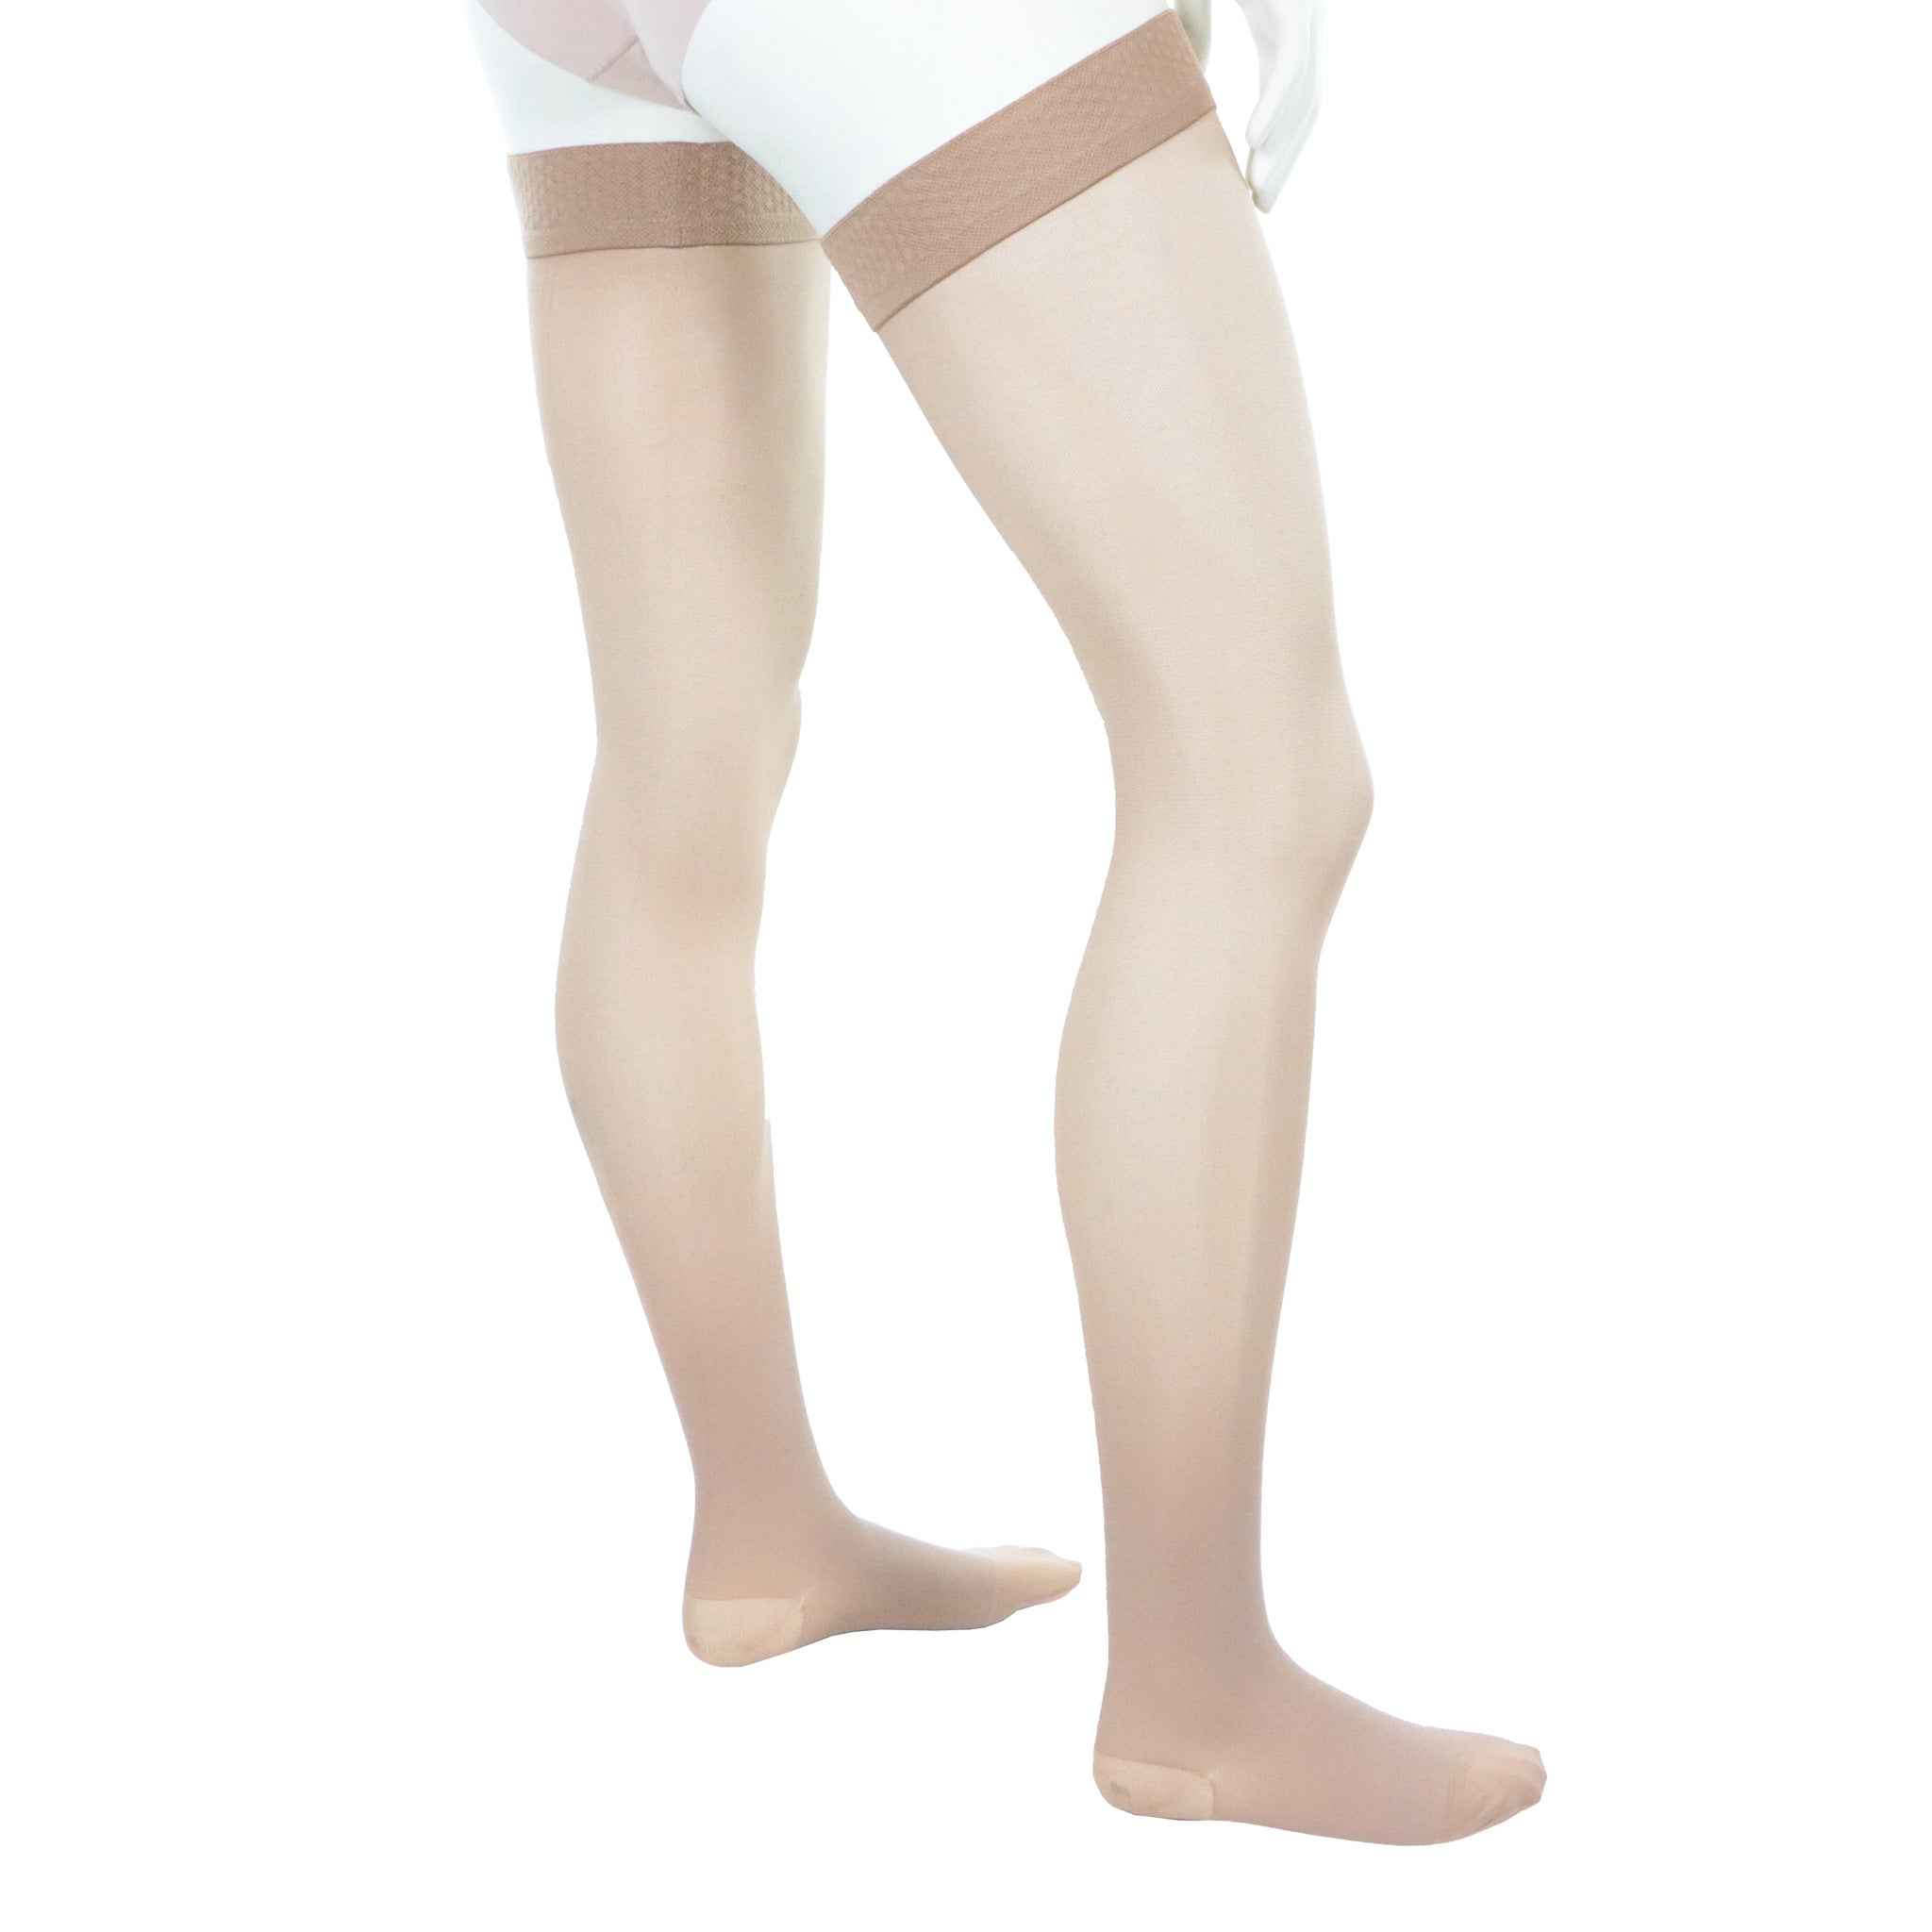 30 40 mmhg compression stockings for women thigh high nude side view